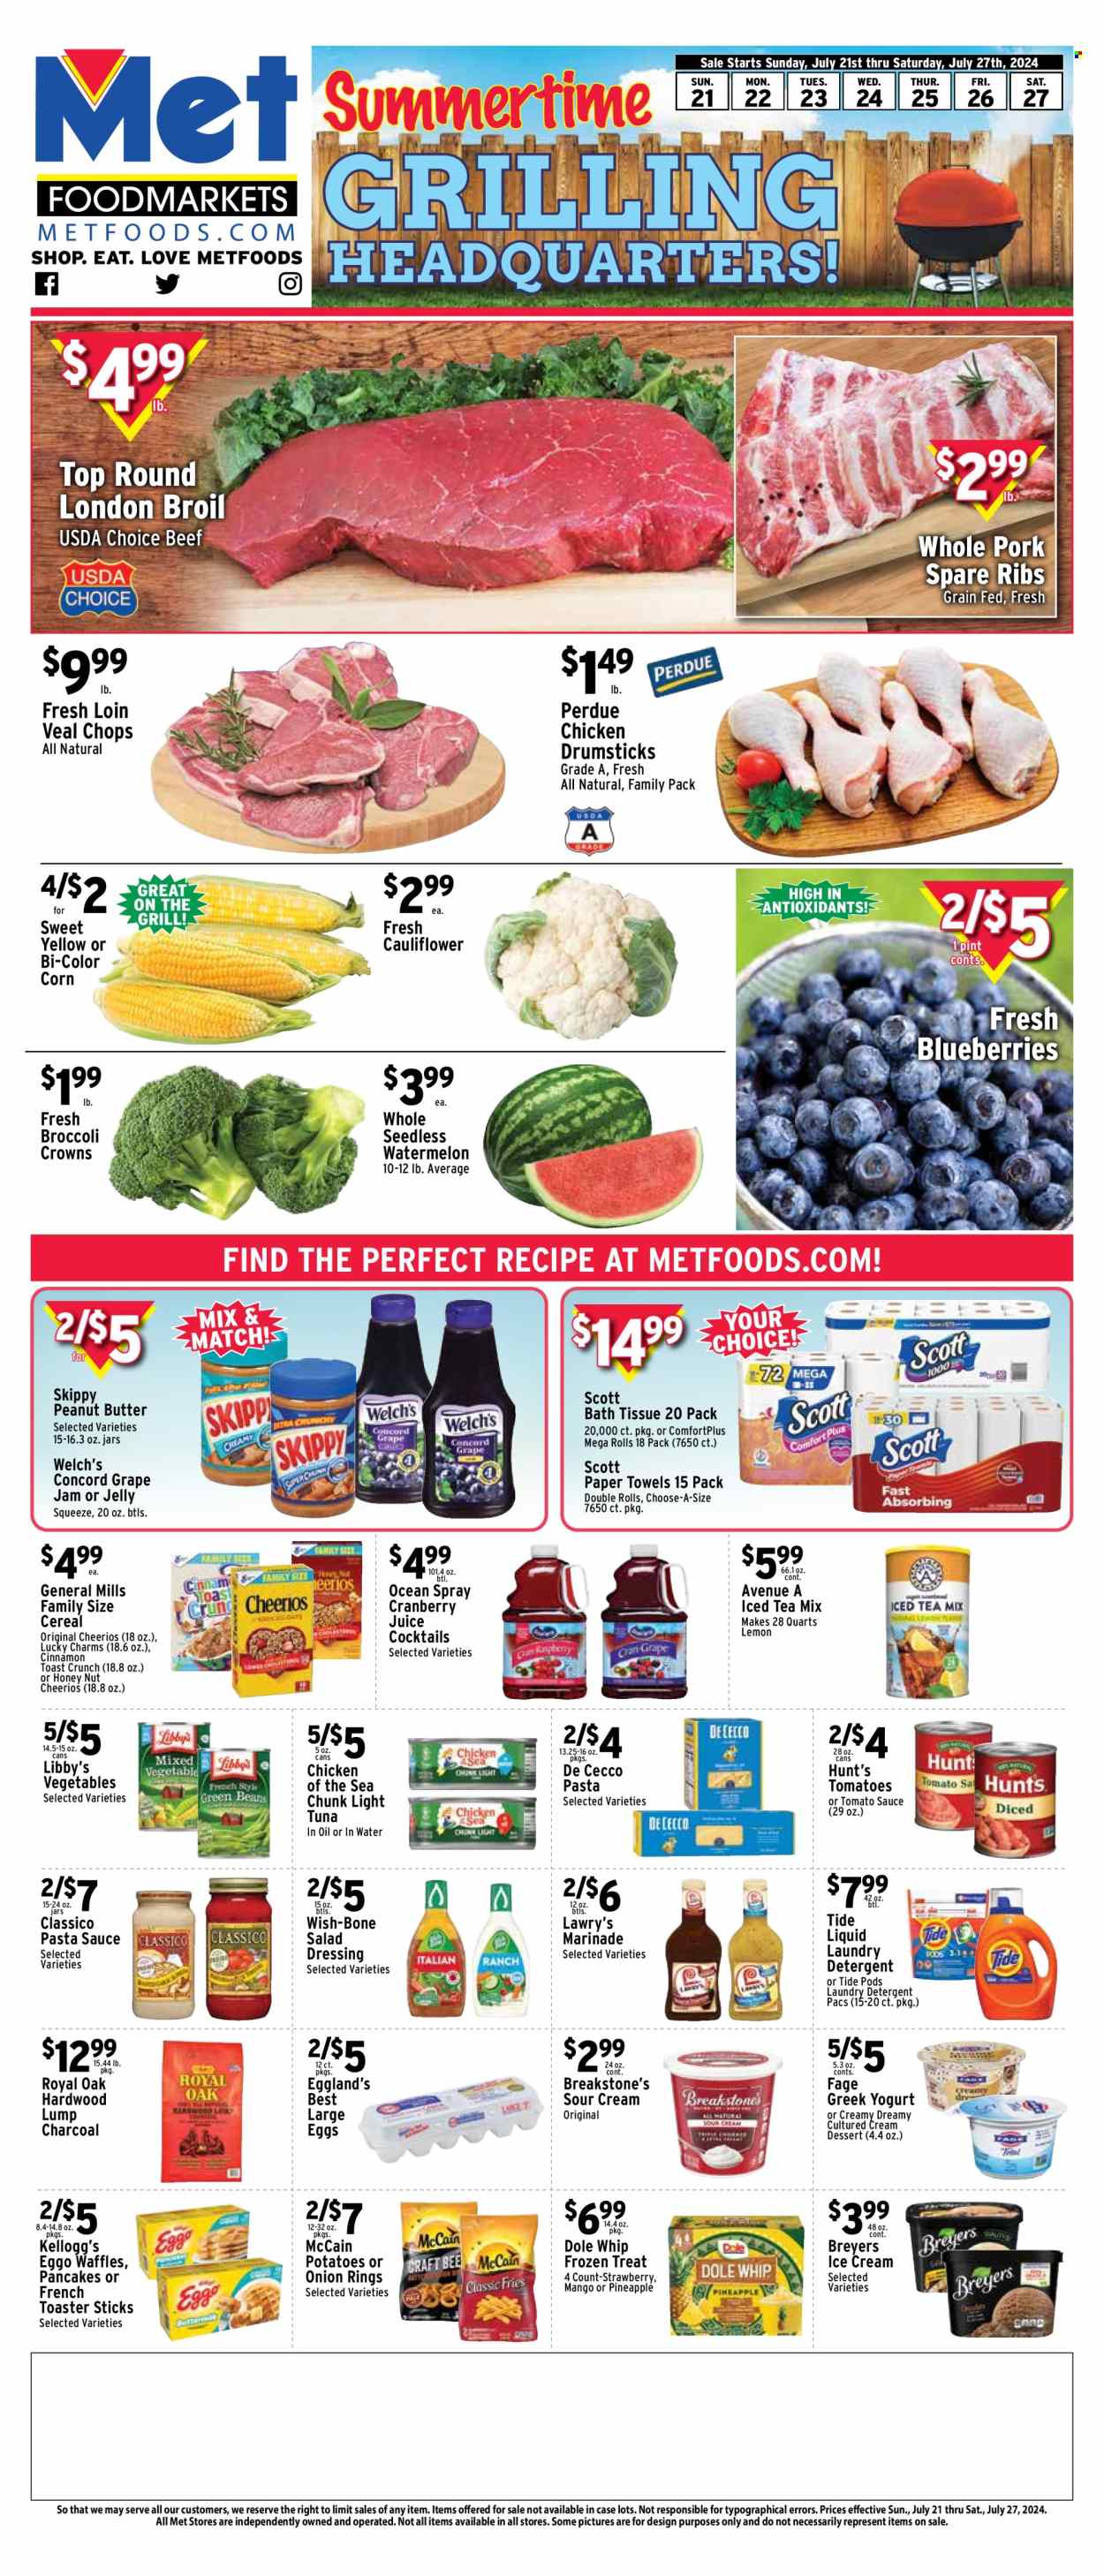 thumbnail - Met Foodmarkets Flyer - 07/21/2024 - 07/27/2024 - Sales products - waffles, dessert, broccoli, cauliflower, corn, tomatoes, Dole, Welch's, tuna, pasta sauce, onion rings, pancakes, Perdue®, spaghetti sauce, ready meal, greek yoghurt, jelly, eggs, large eggs, sour cream, ice cream, McCain, potato fries, Kellogg's, General Mills, canned tomatoes, canned tuna, tomato sauce, canned vegetables, light tuna, Chicken of the Sea, canned fish, cereals, Cheerios, salad dressing, dressing, marinade, sauce, Classico, peanut butter, jam, cranberry juice, juice, ice tea, chicken drumsticks, beef meat, beef steak, veal cutlet, veal meat, steak, ribs, pork meat, pork ribs, pork spare ribs. Page 1.